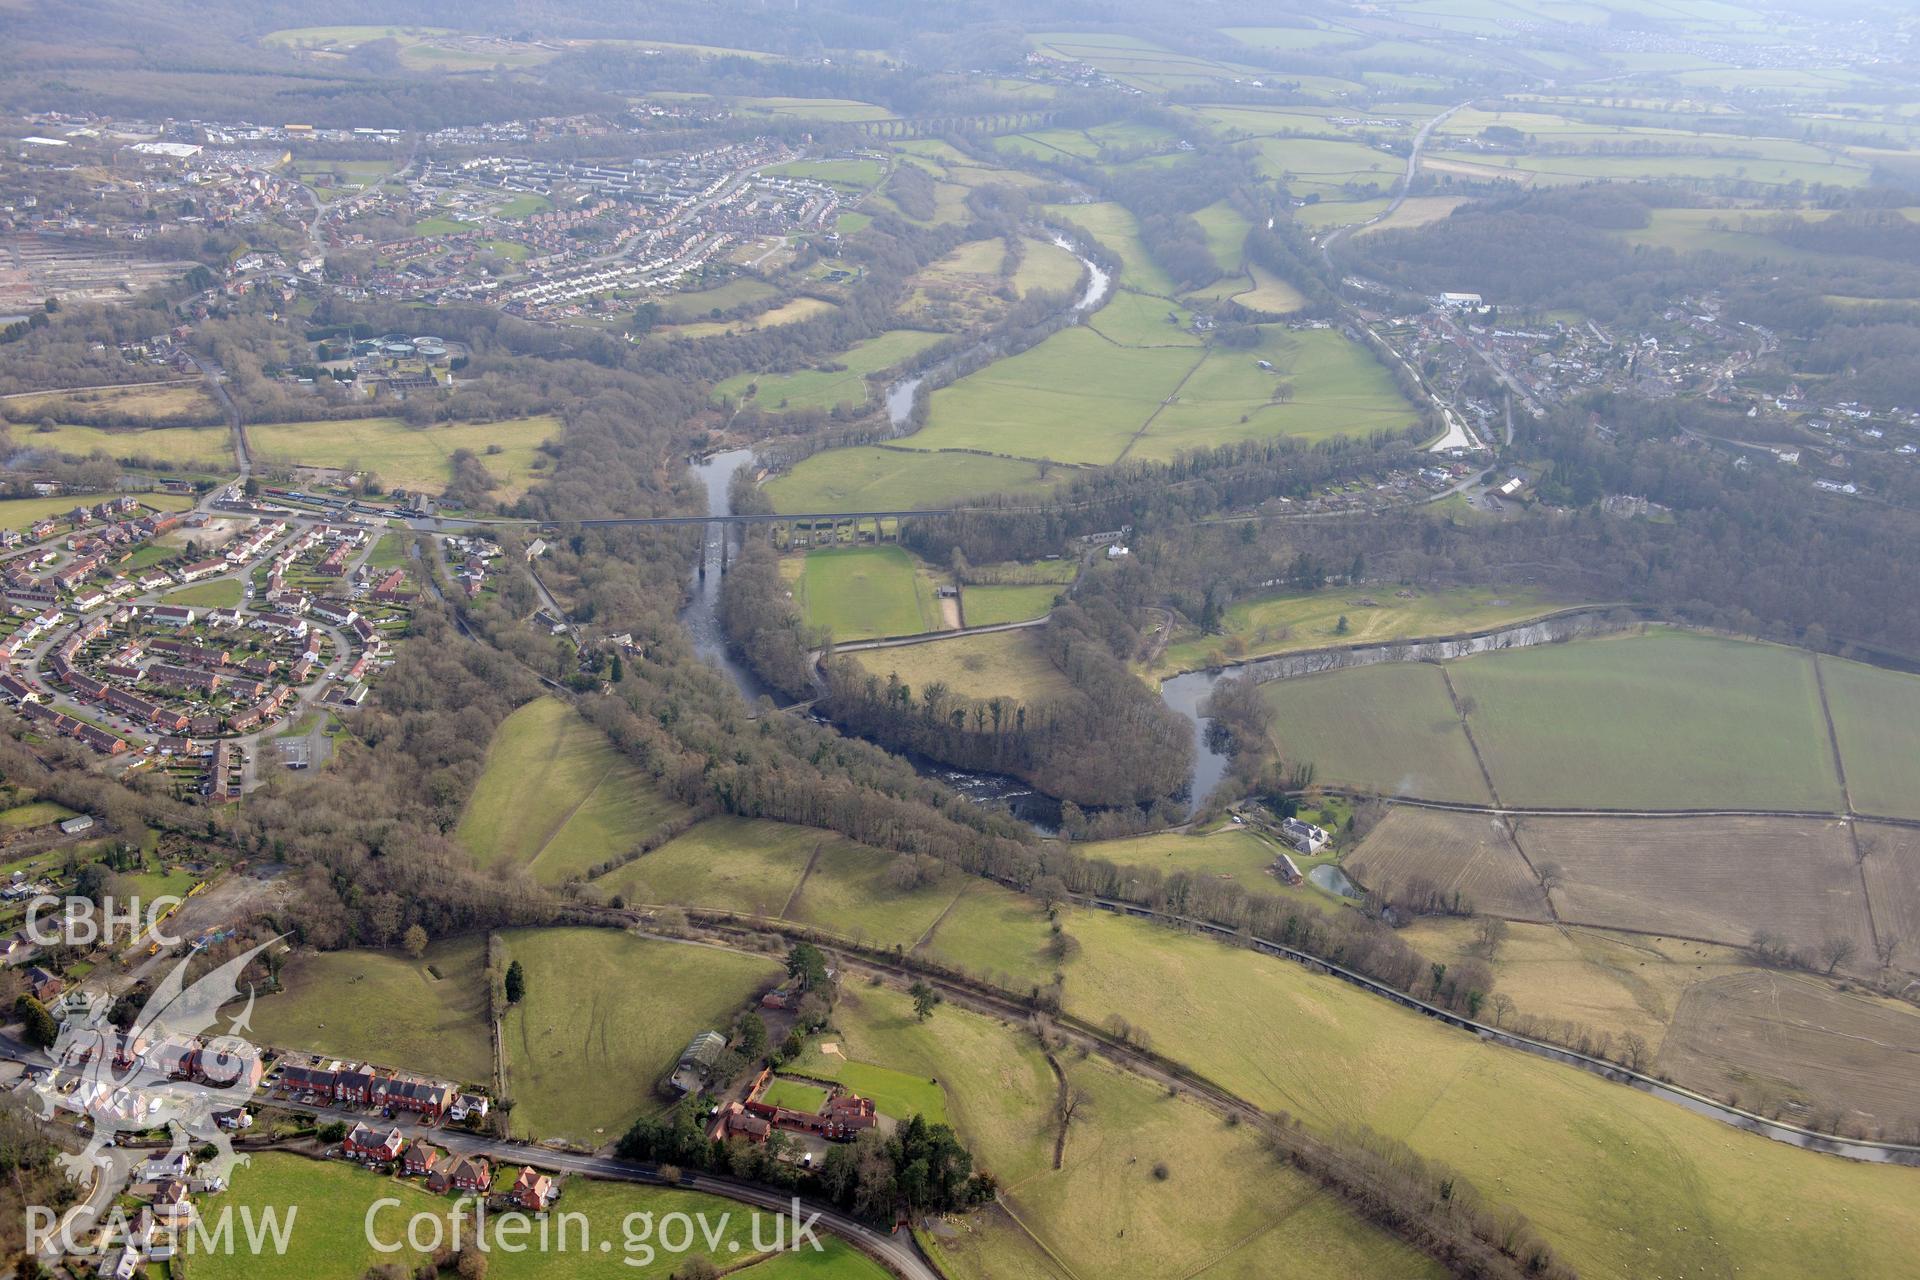 The village of Trevor, Llangollen Canal, Pontcysyllte Aqueduct and Bryn-Oerog garden, Llangollen. Oblique aerial photograph taken during the Royal Commission?s programme of archaeological aerial reconnaissance by Toby Driver on 28th February 2013.